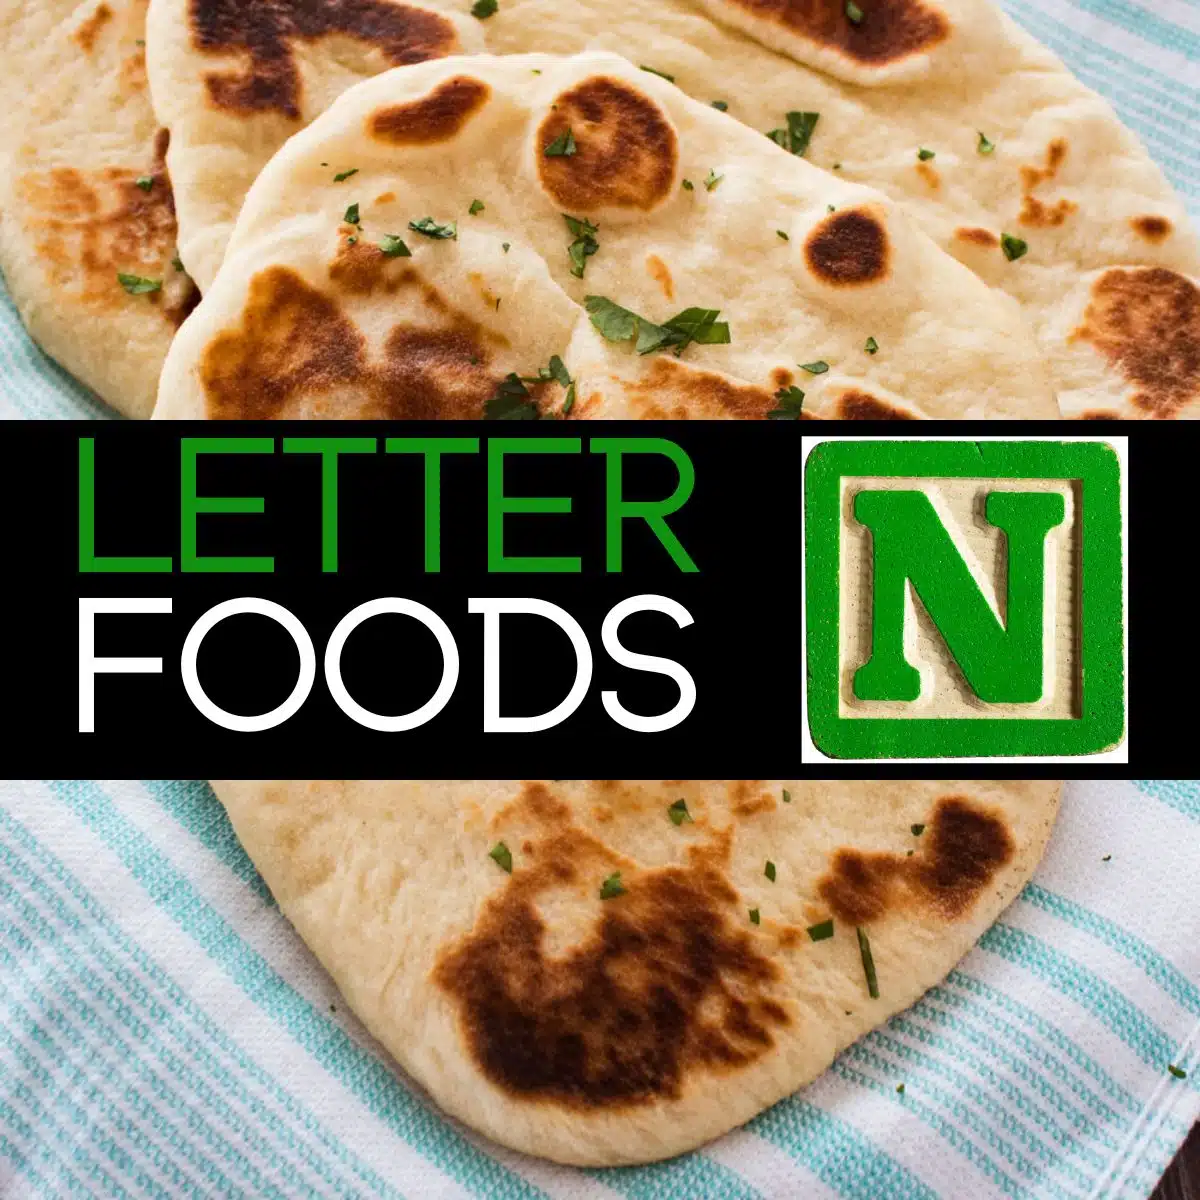 Square image for foods that start with the letter N, featuring naan bread.